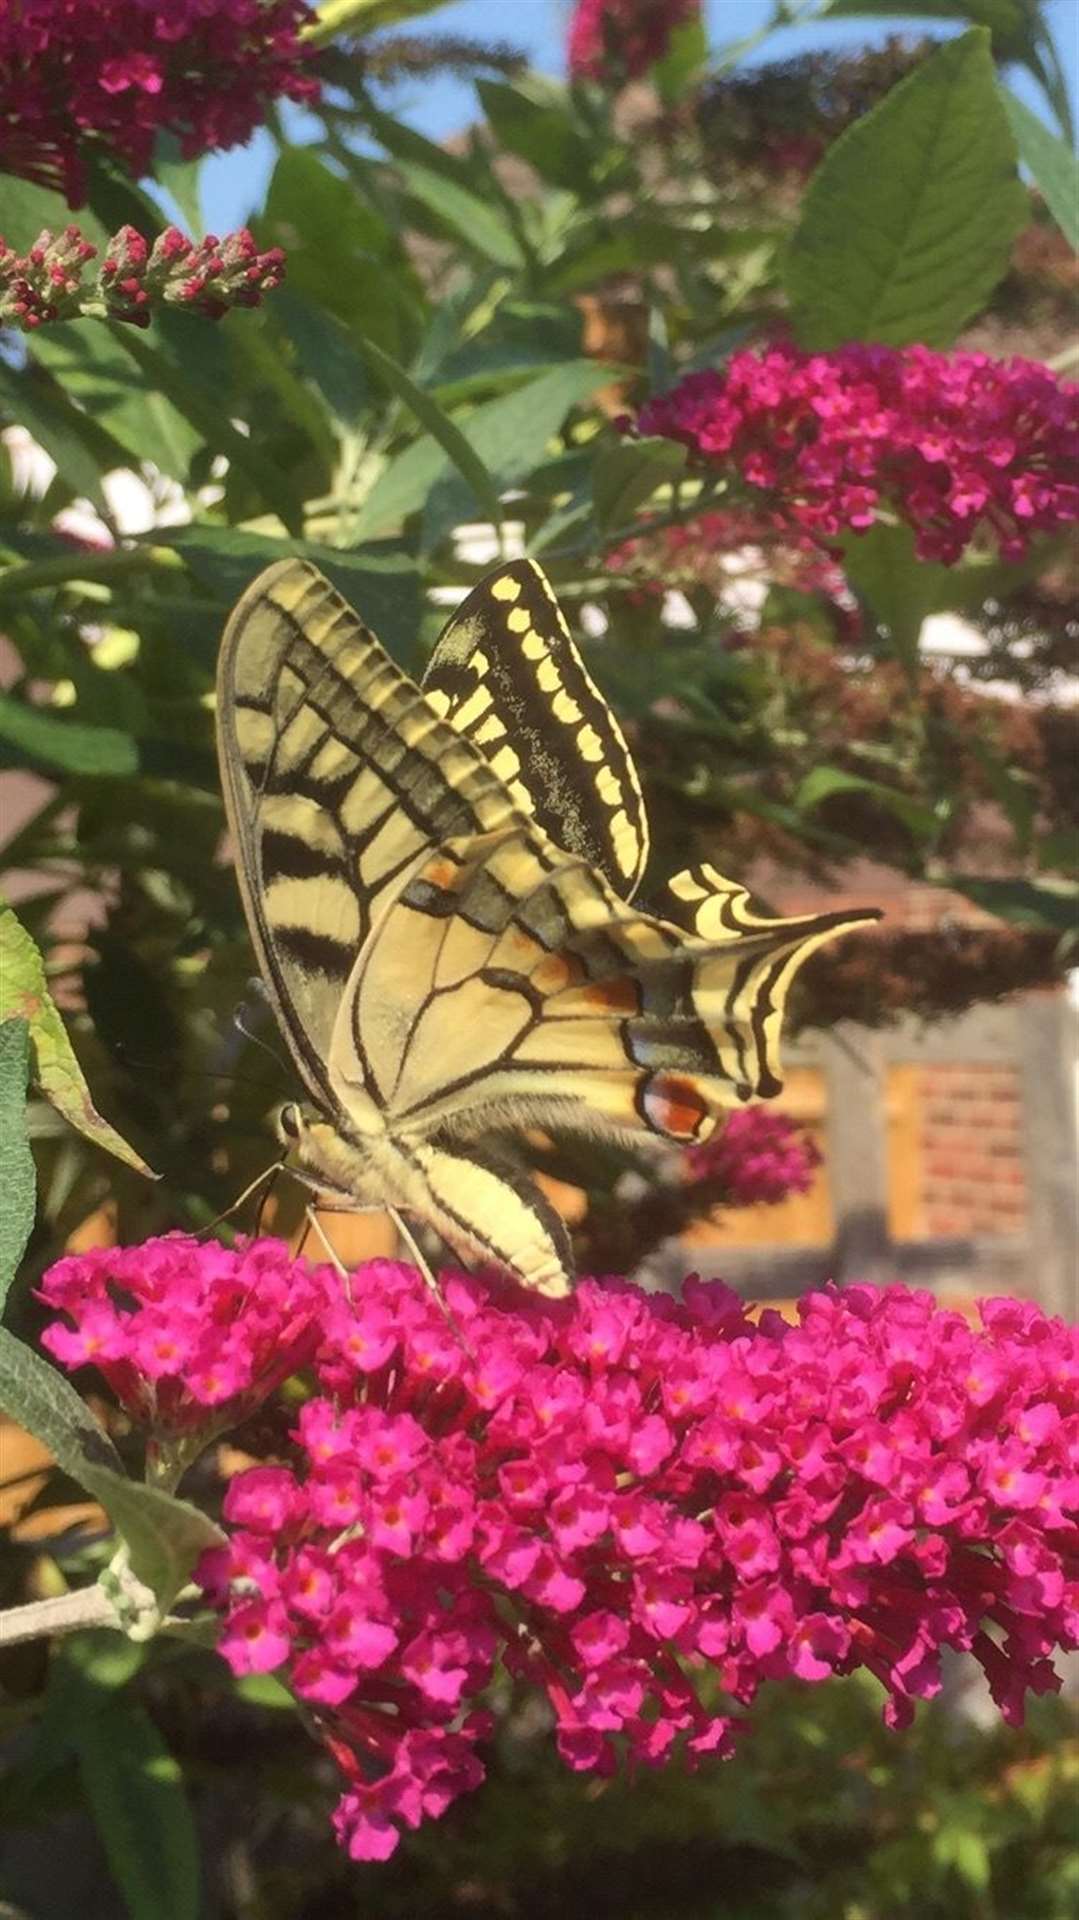 The swallowtail has landed - Mr Stapley's one good photo of his rare visitor